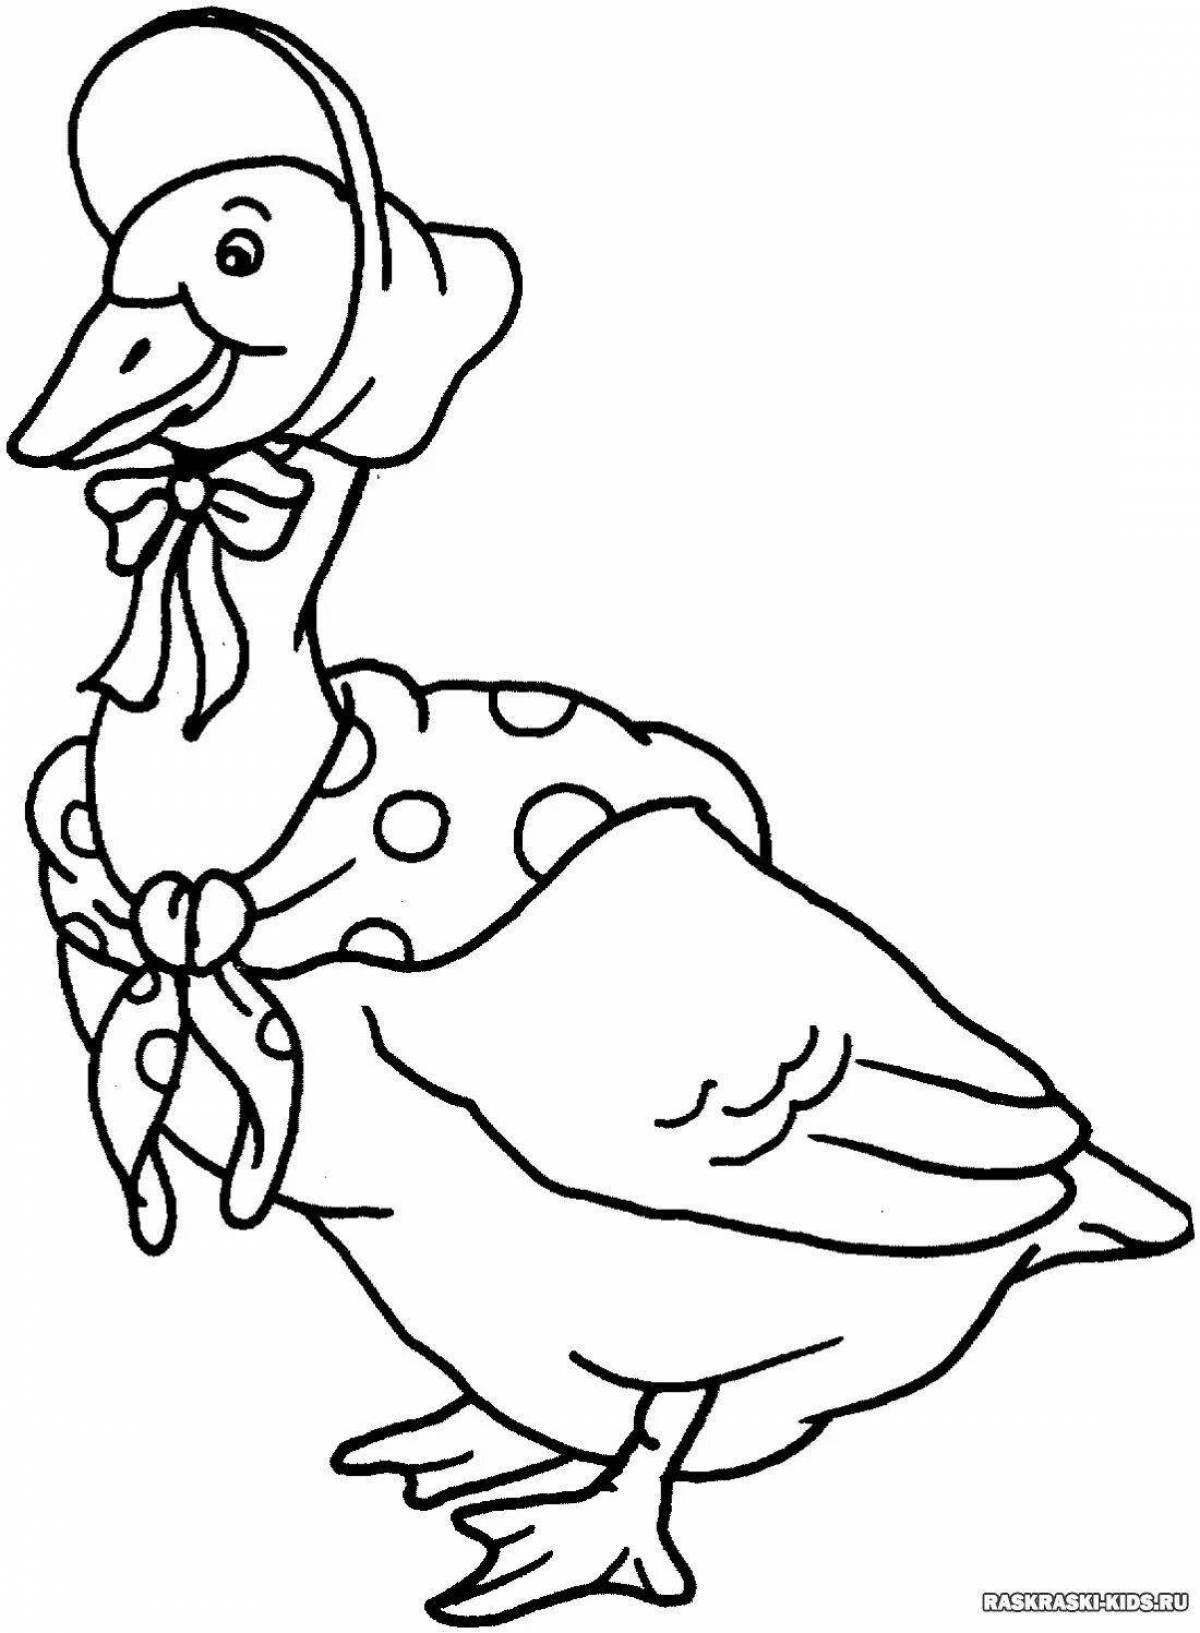 Blissful goose hug coloring page